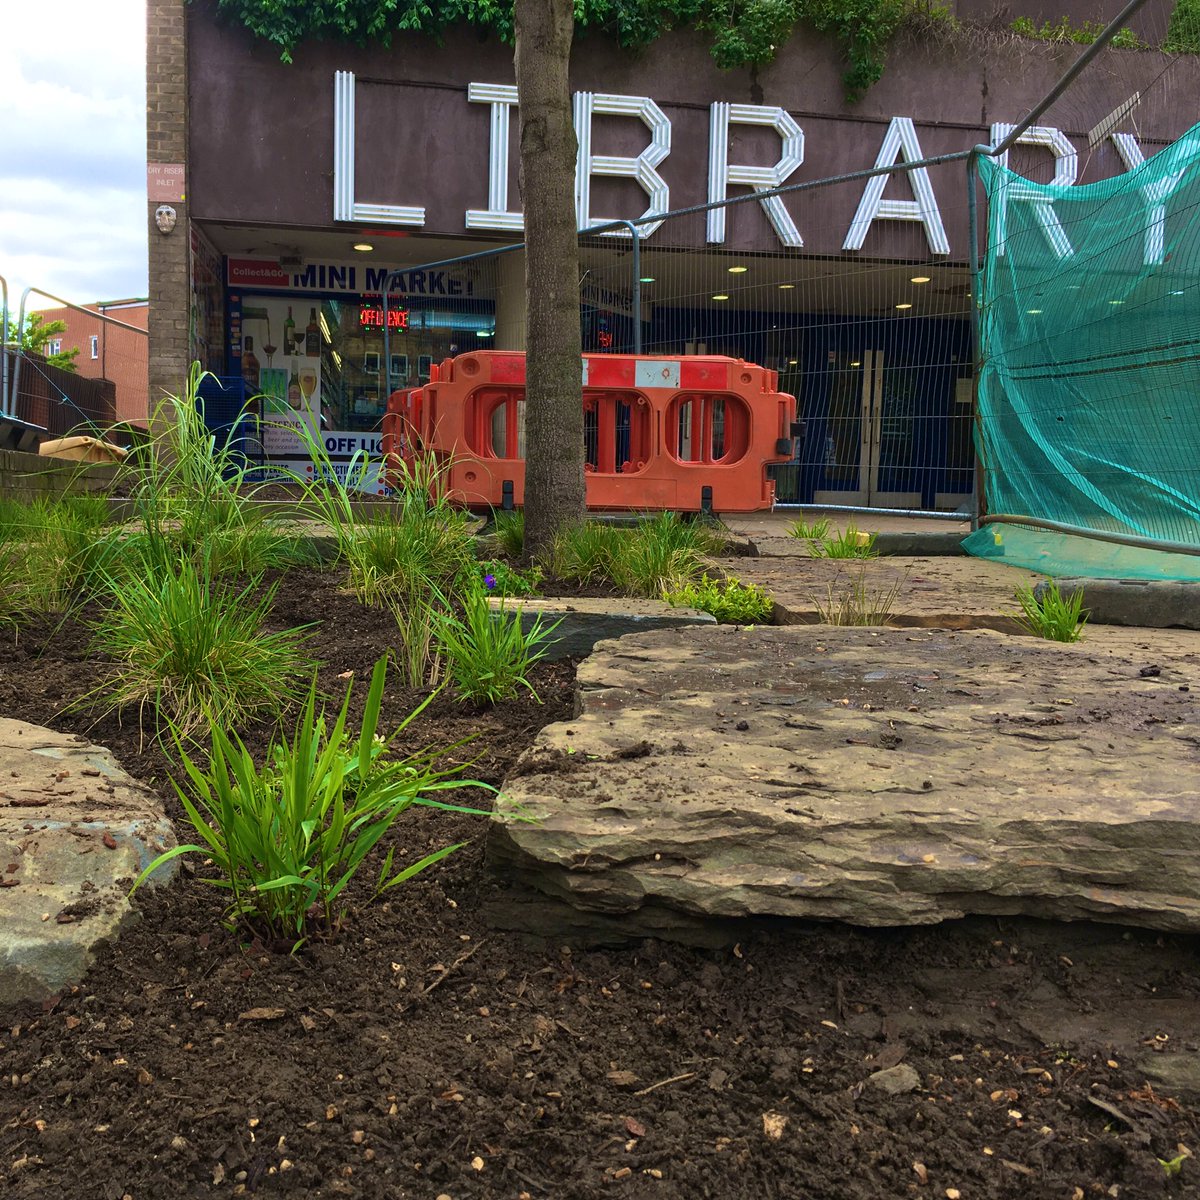 💚 the Green heart at the hub of Wood Green 💚

The beautiful green dreams are becoming community spaces in reality 💚

#LibraryGarden #ecoexist